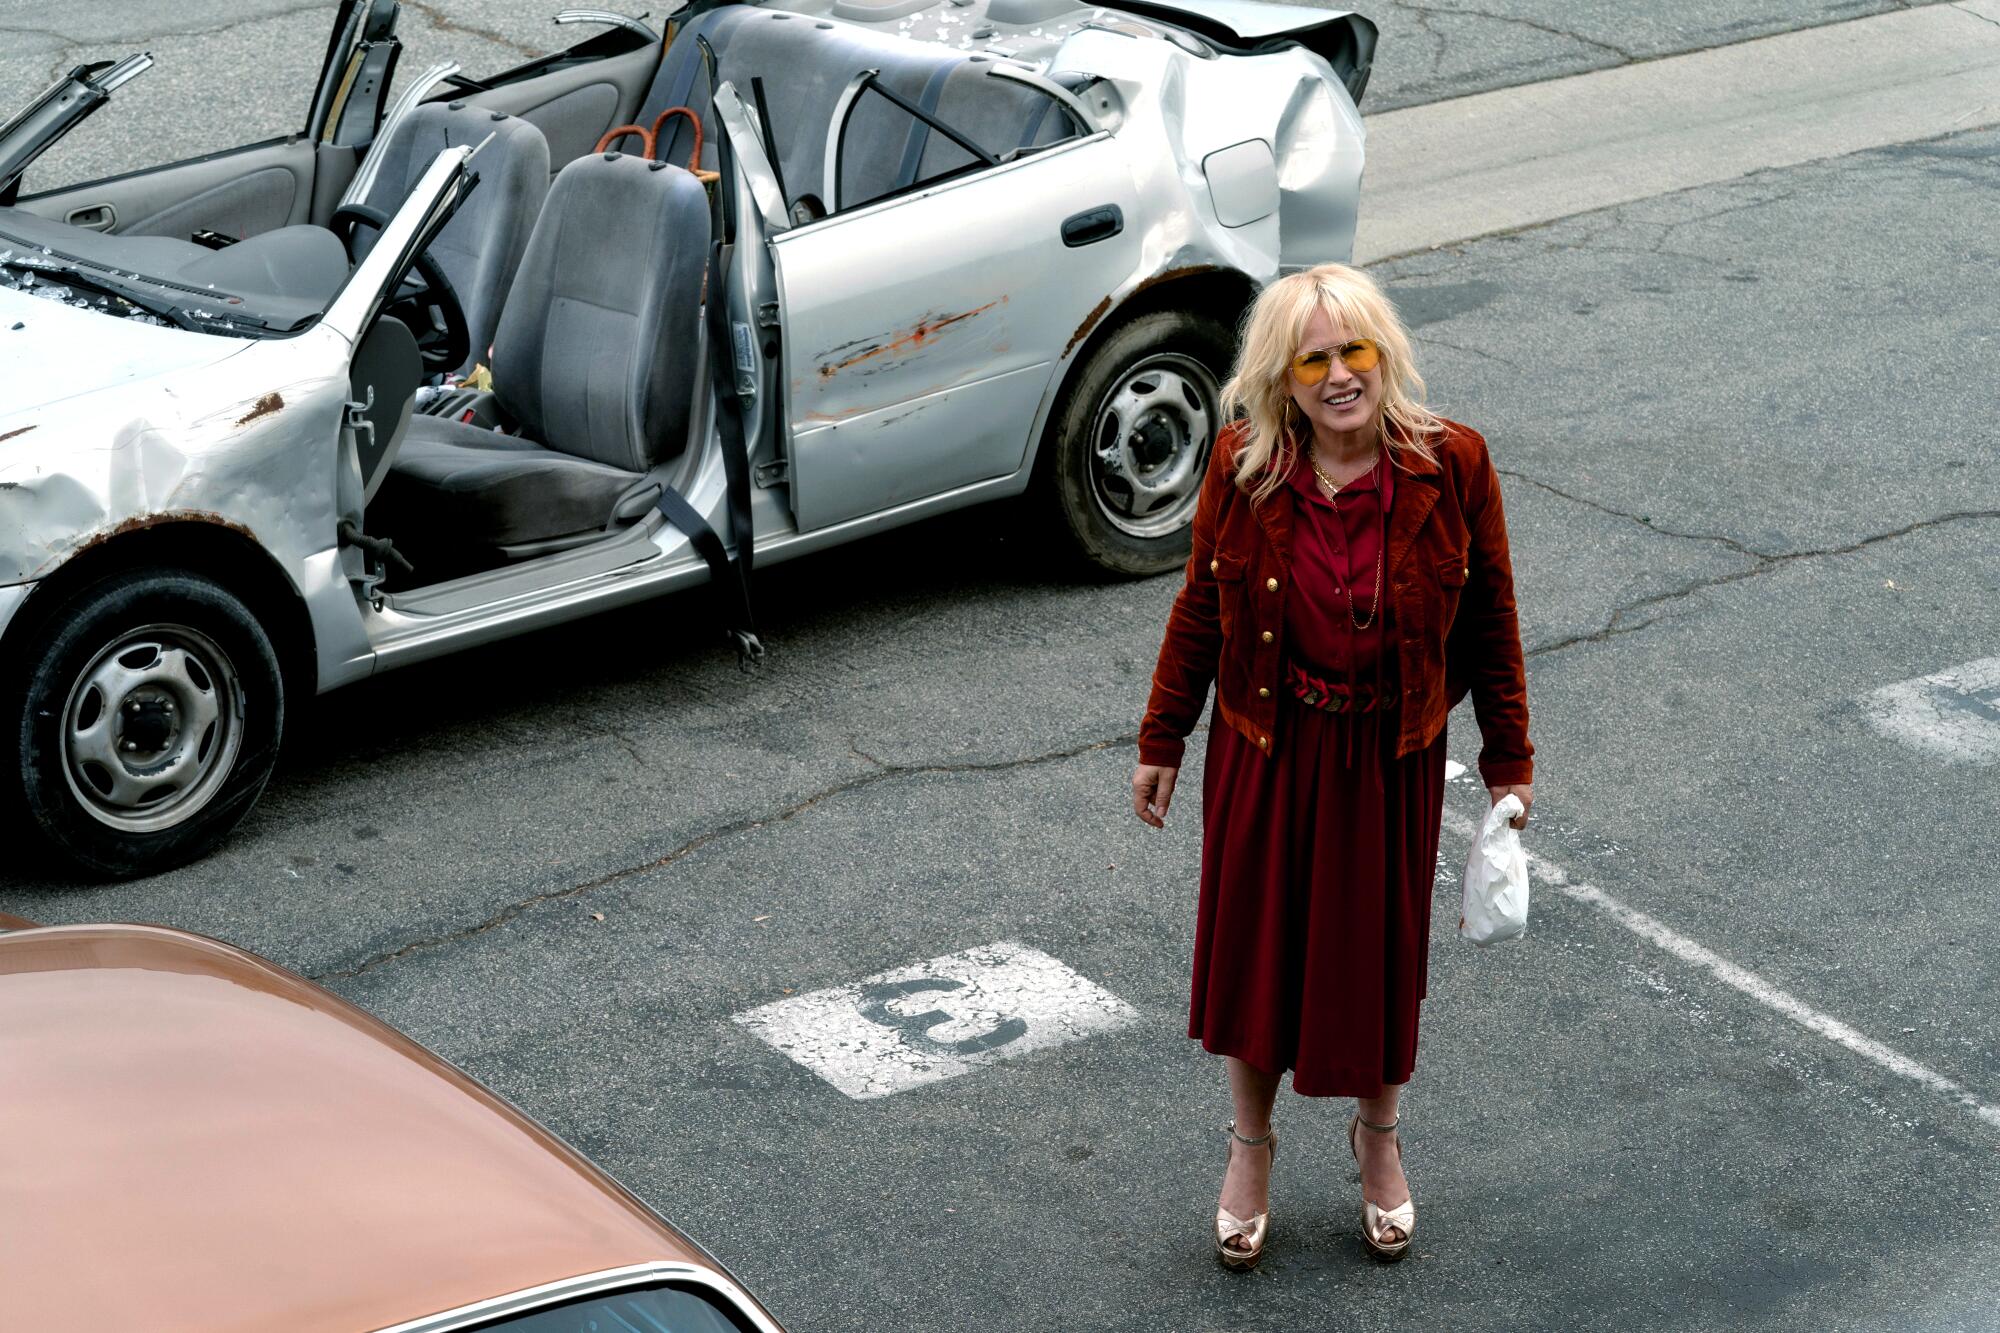 A blonde woman in a maroon jacket and dress stands in front of a beat up silver car with no roof.